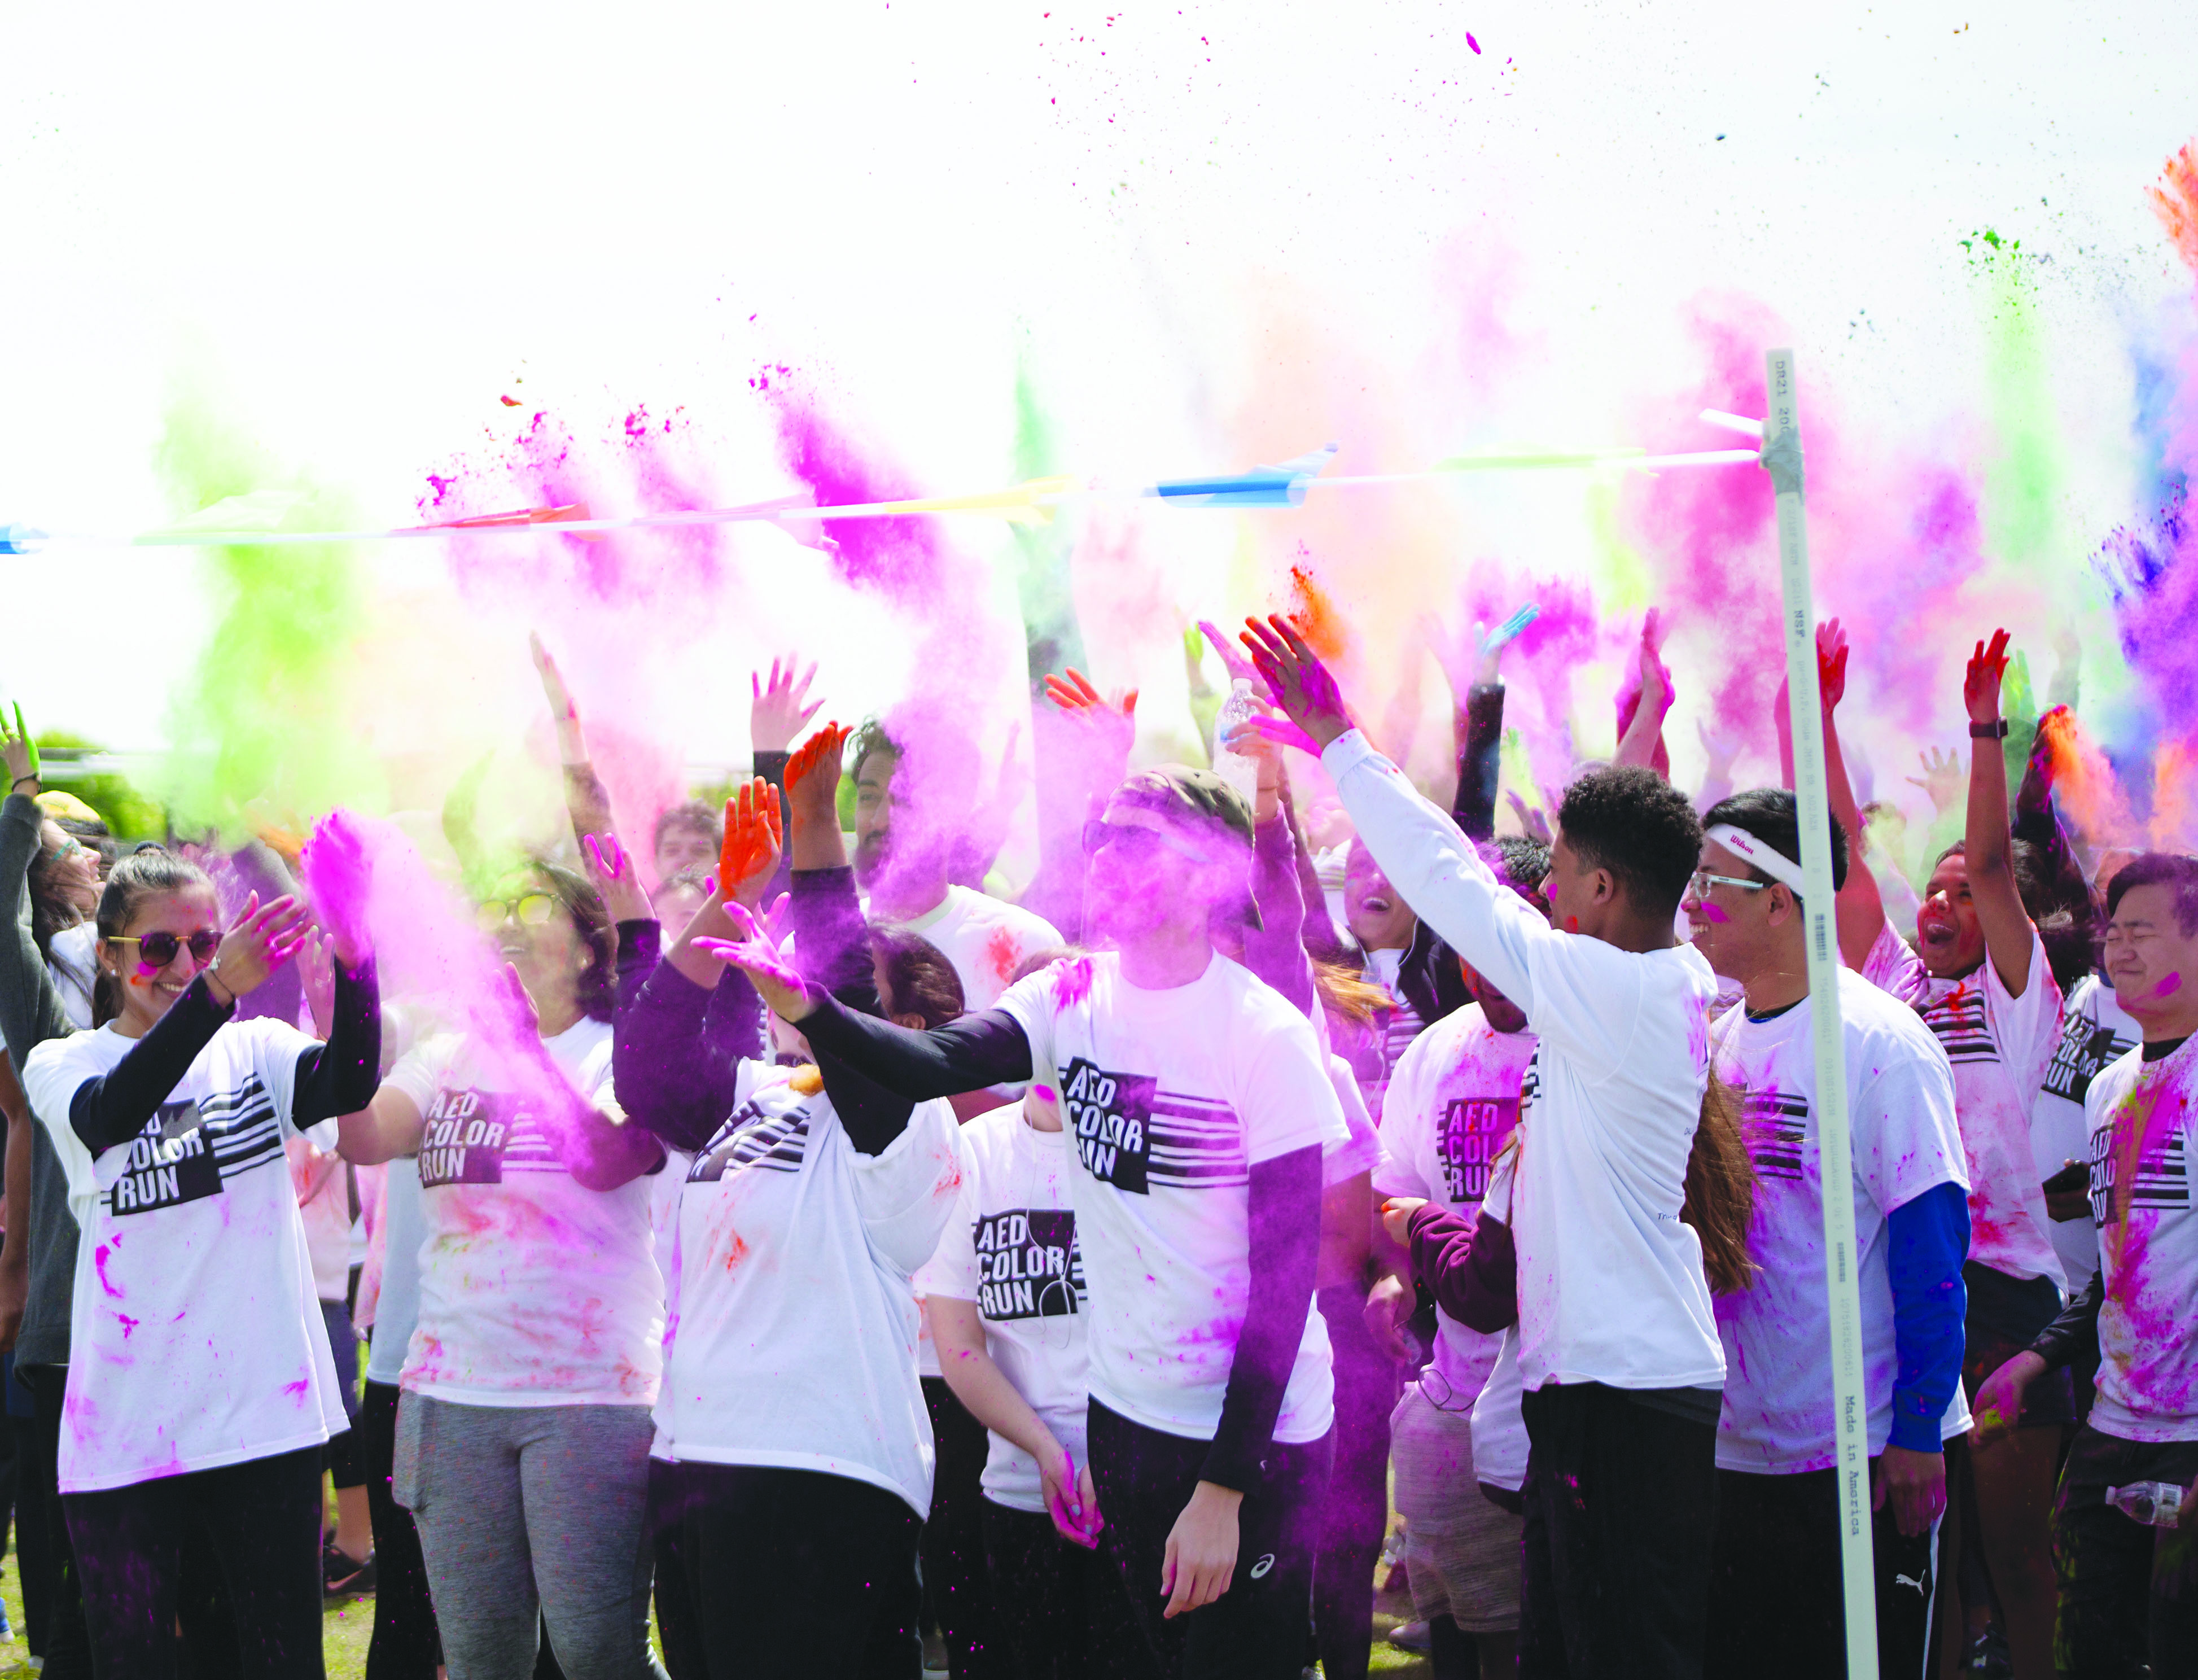 Students run to beat cancer